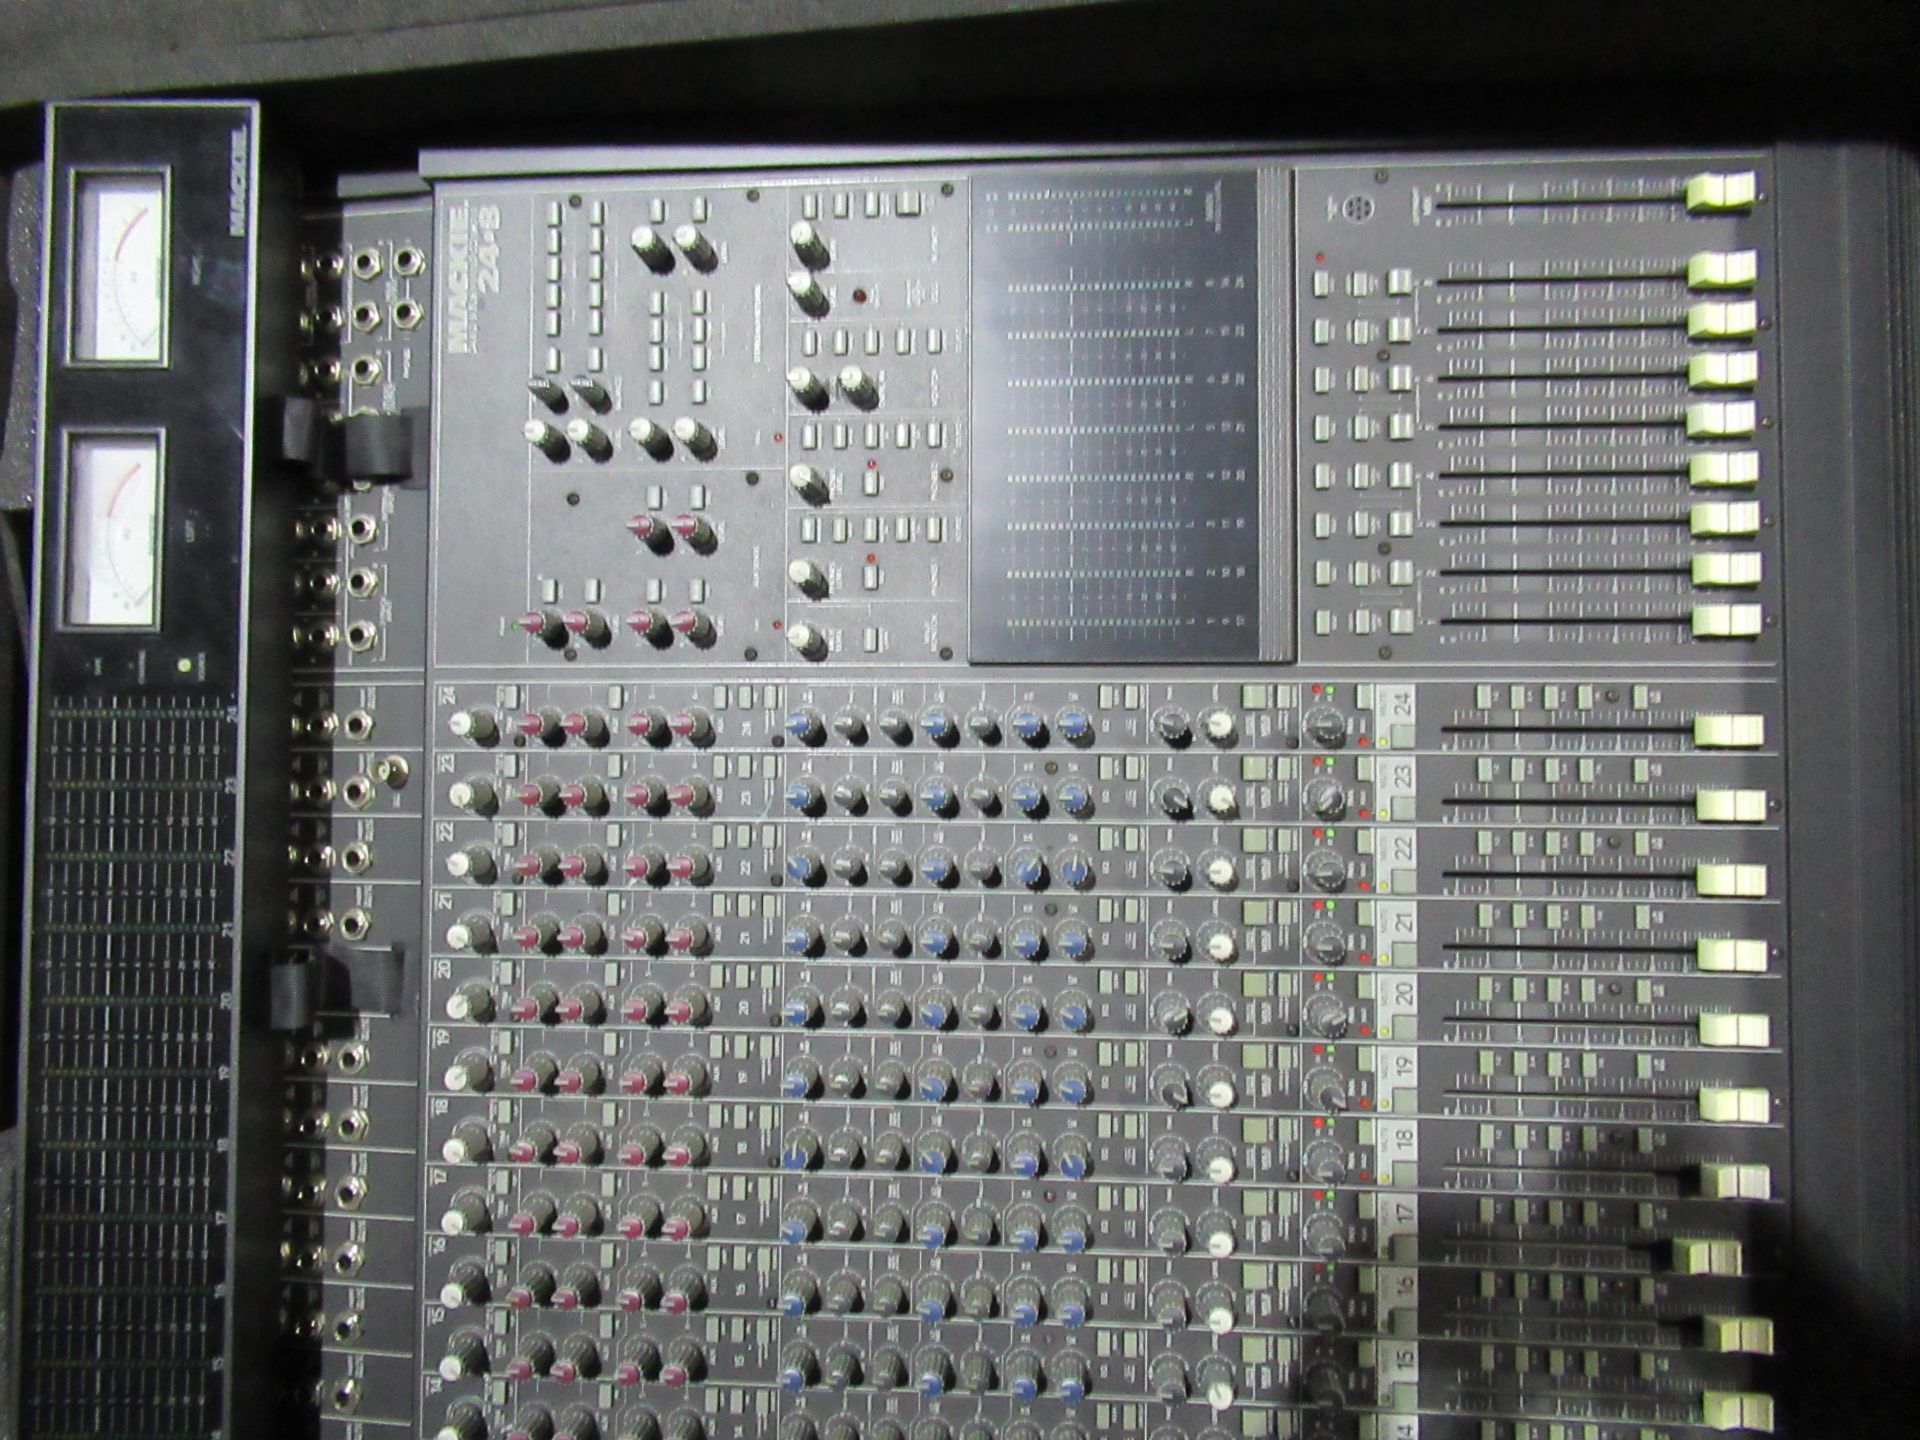 Mackie 24802 Mixer Console with Meter Bridge and PSU in flight case - Image 2 of 2